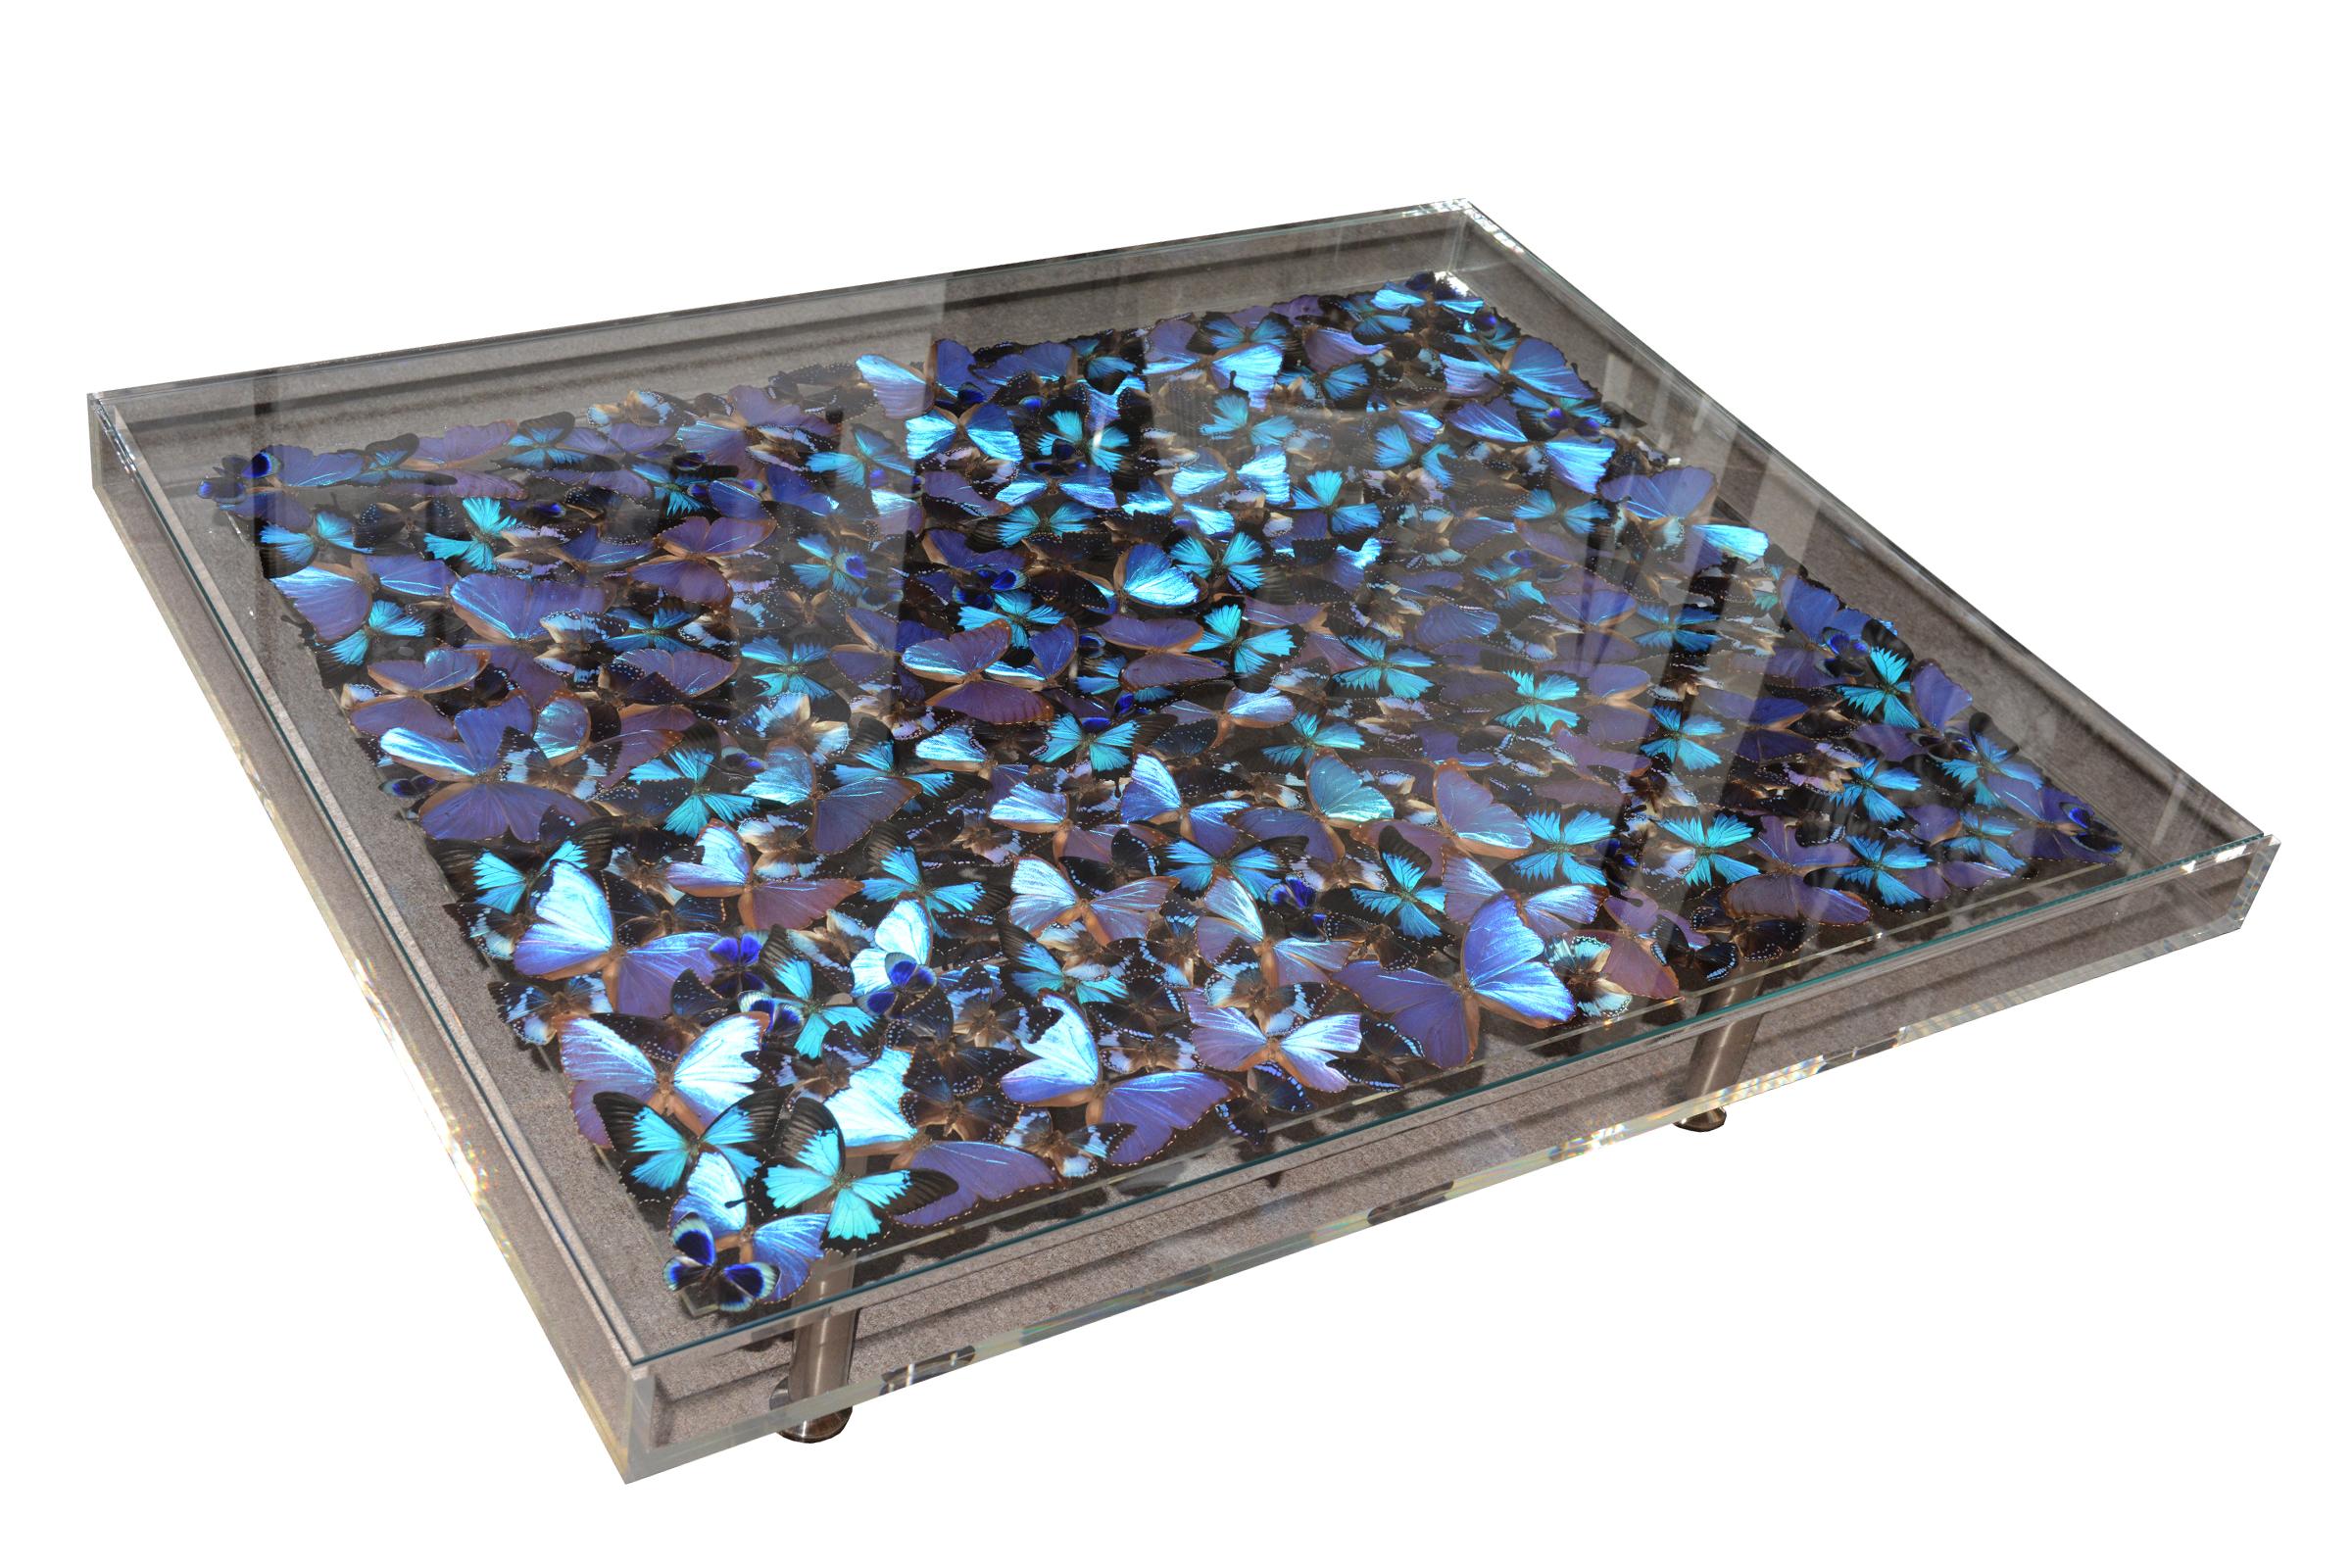 Coffee table blue butterflies with plexiglass top frame and with
clear glass top. With around 330 Butterflies. No specimens are protected.
With butterflies Morpho didius, Morpho Menelaus, Papilio Ulysses, Charaxes
tiridates, Charaxes Laodice,